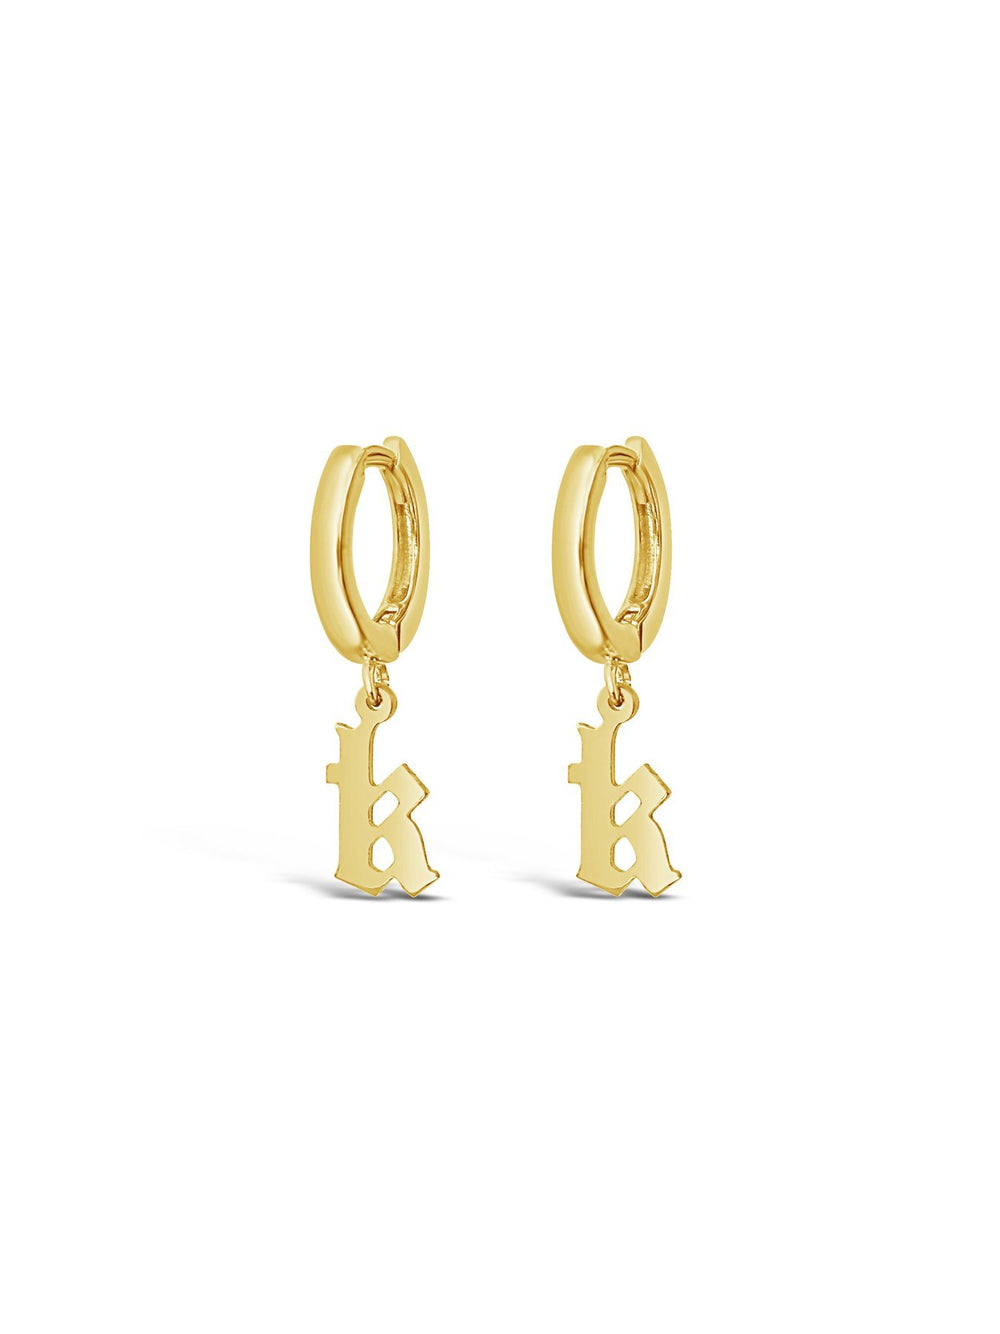 Gothic Initial Earrings - Lucky Eleven Jewellery